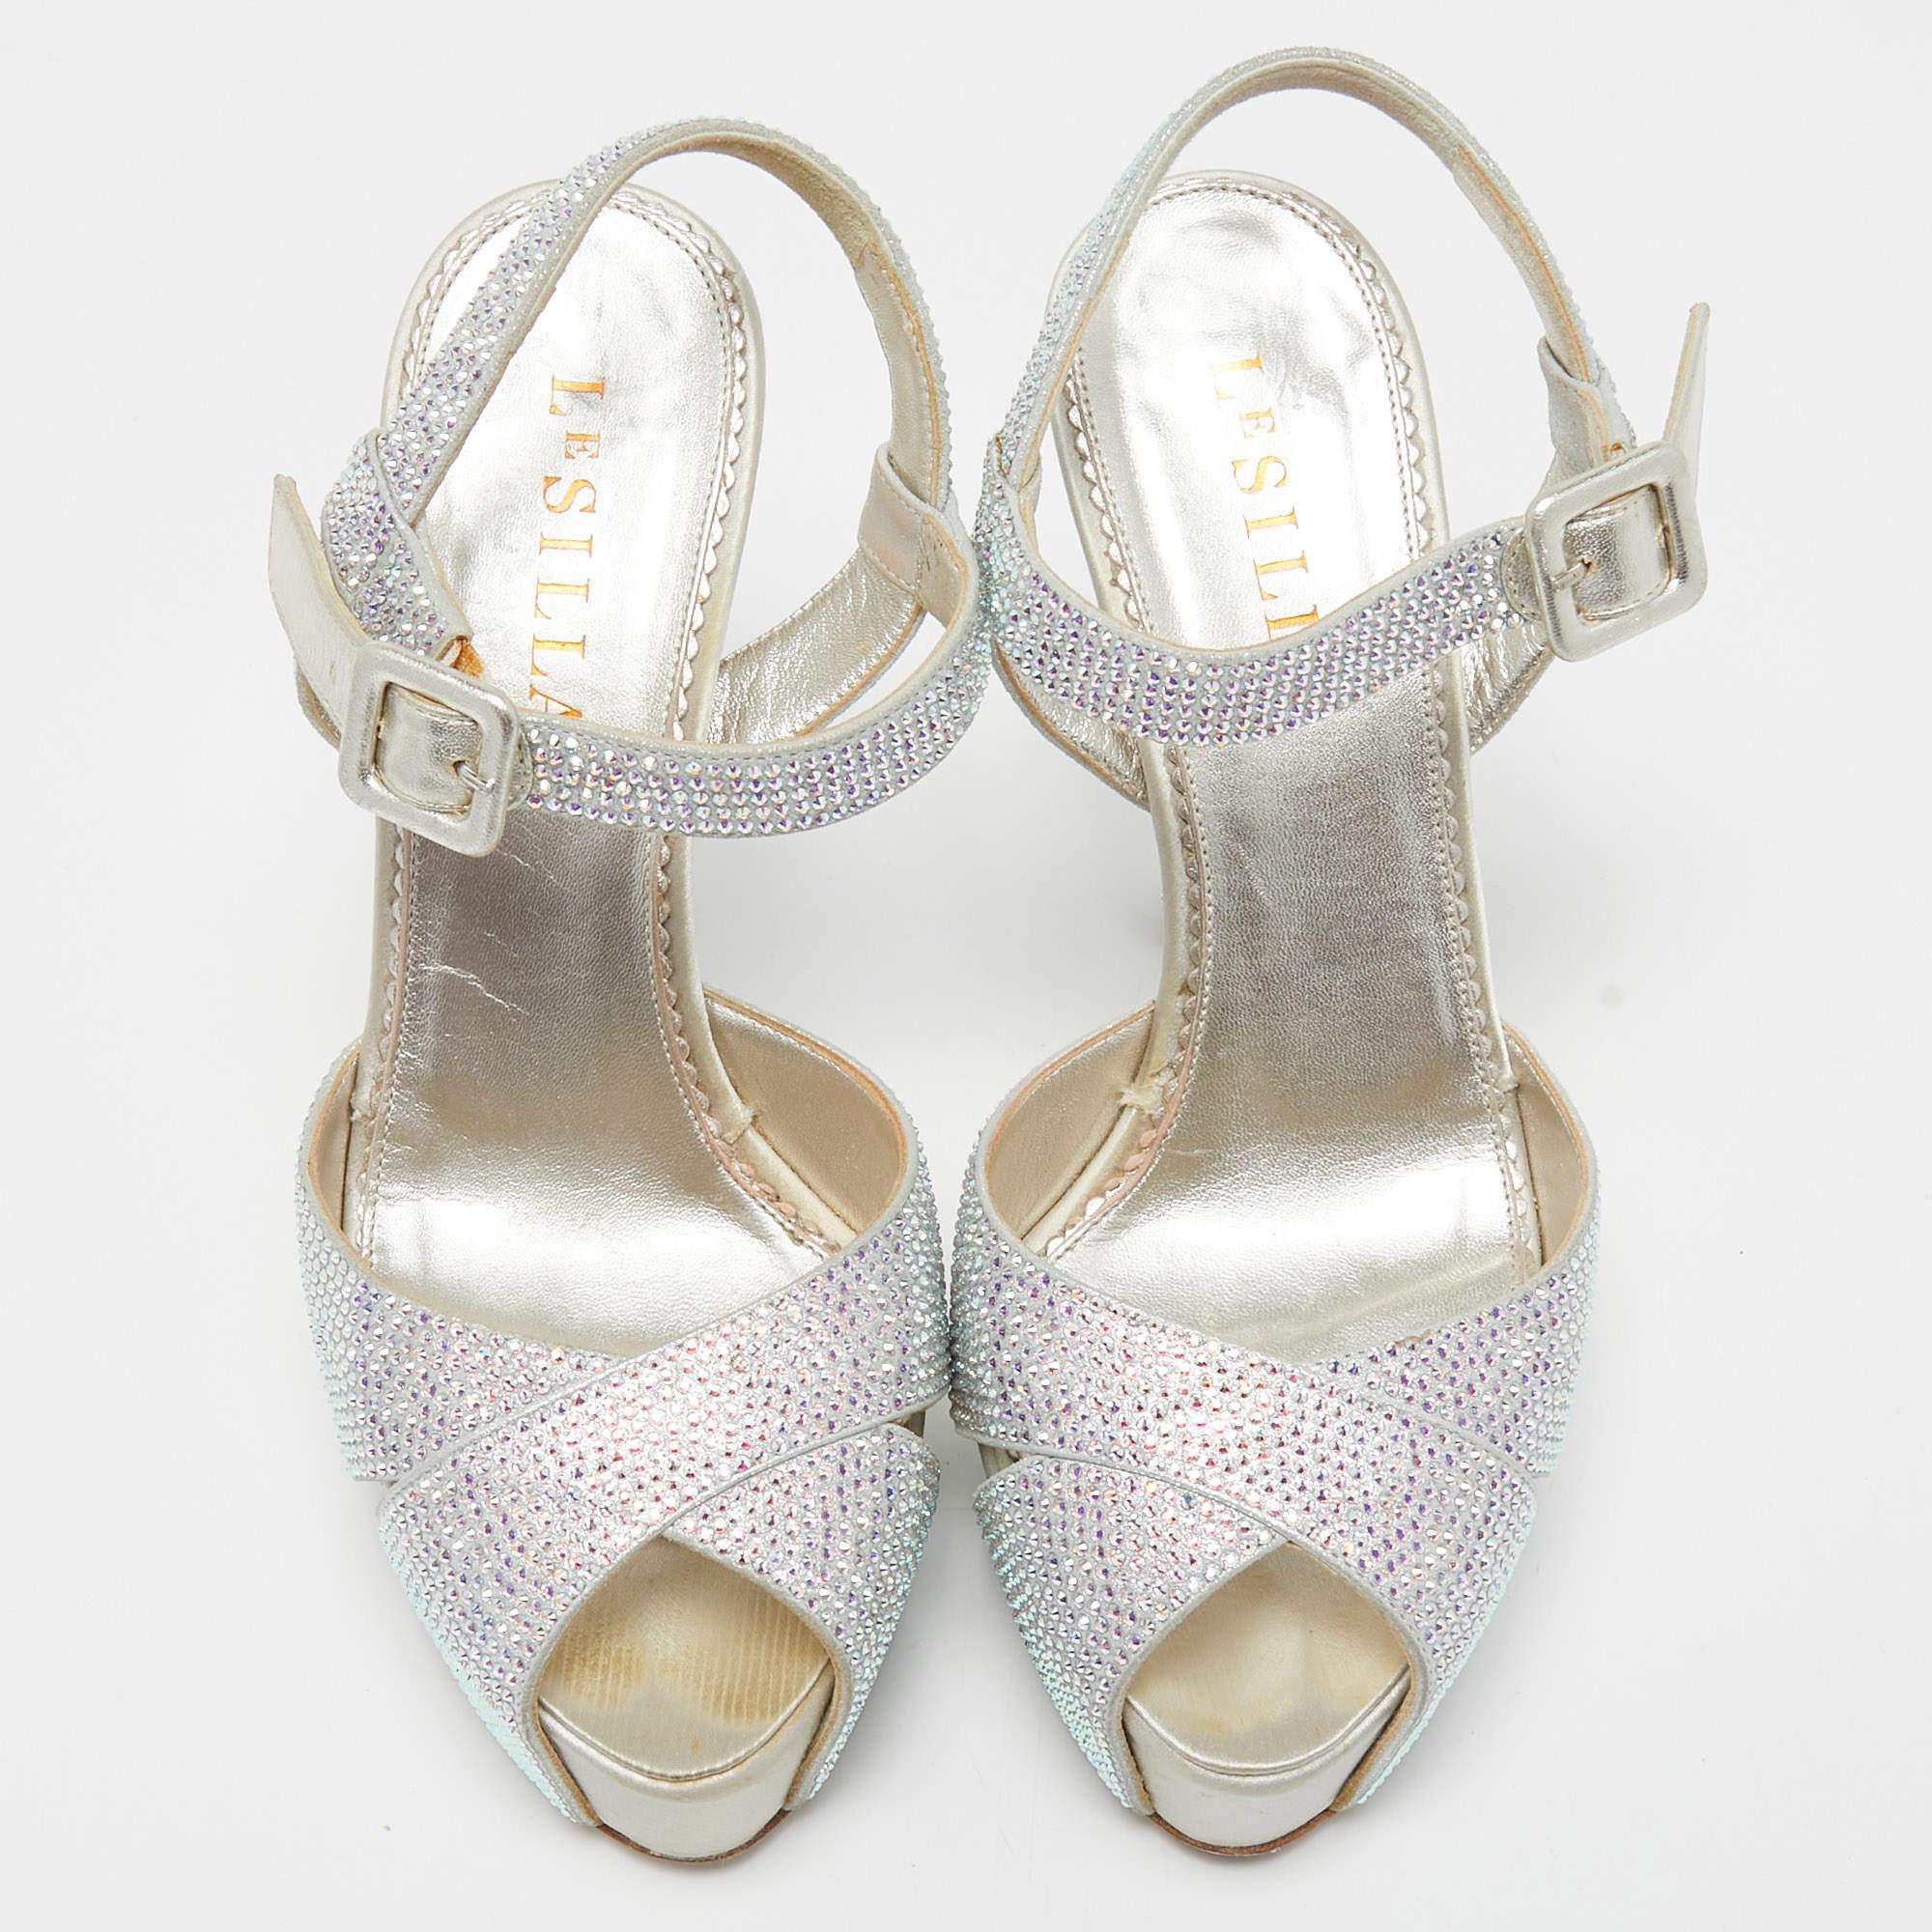 To gift you elegance, Le Silla bring you these gorgeous limited edition sandals. From their shape and luscious silver finish to their overall appeal, they are utterly mesmerizing. The sandals come crafted from leather and designed with peep-toes,